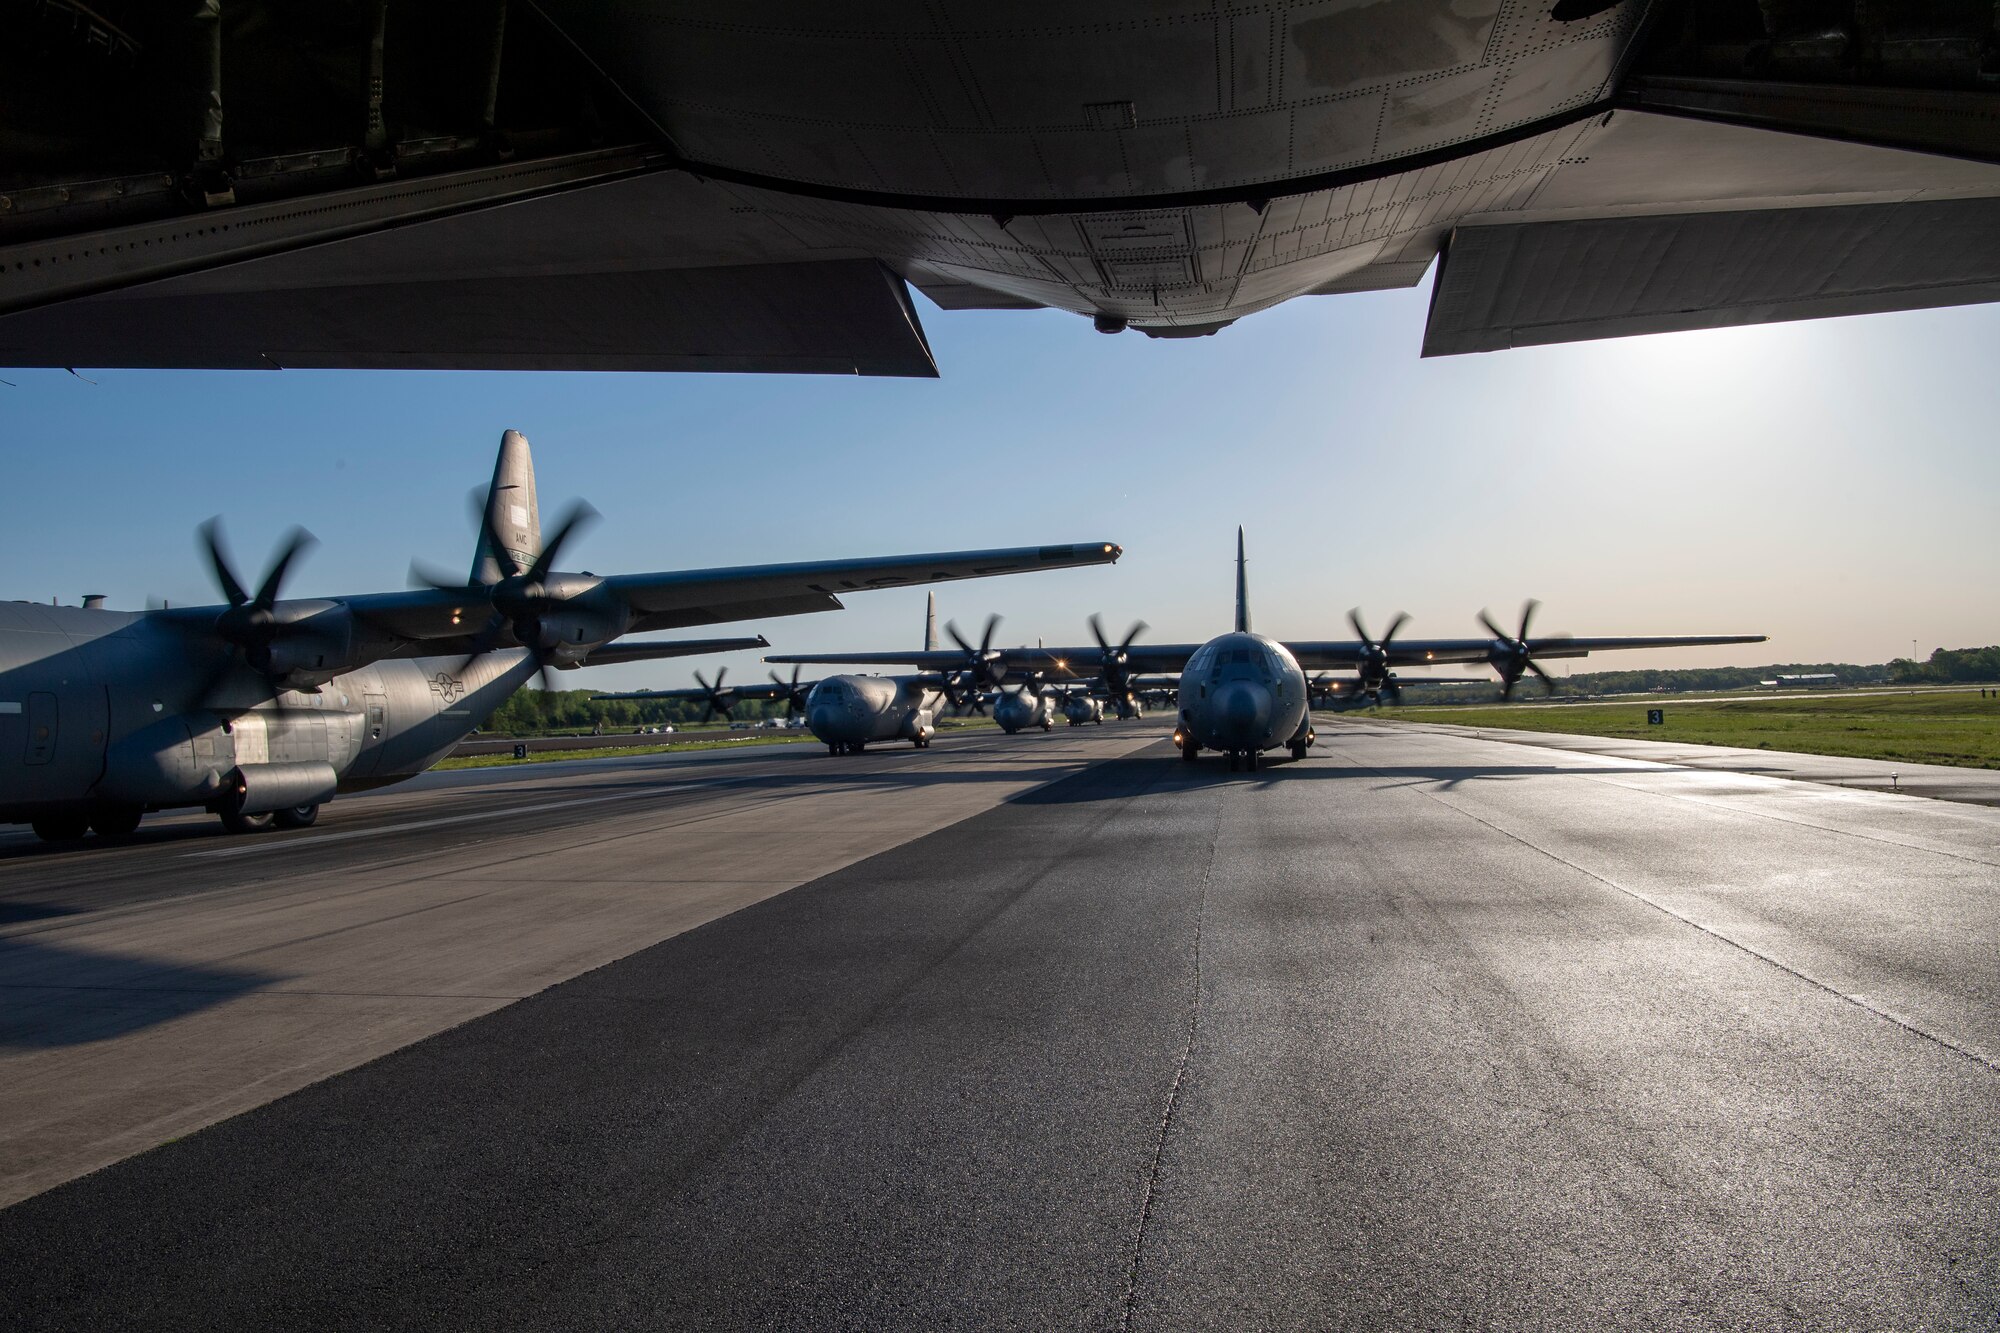 A group of C-130Js prepare for takeoff